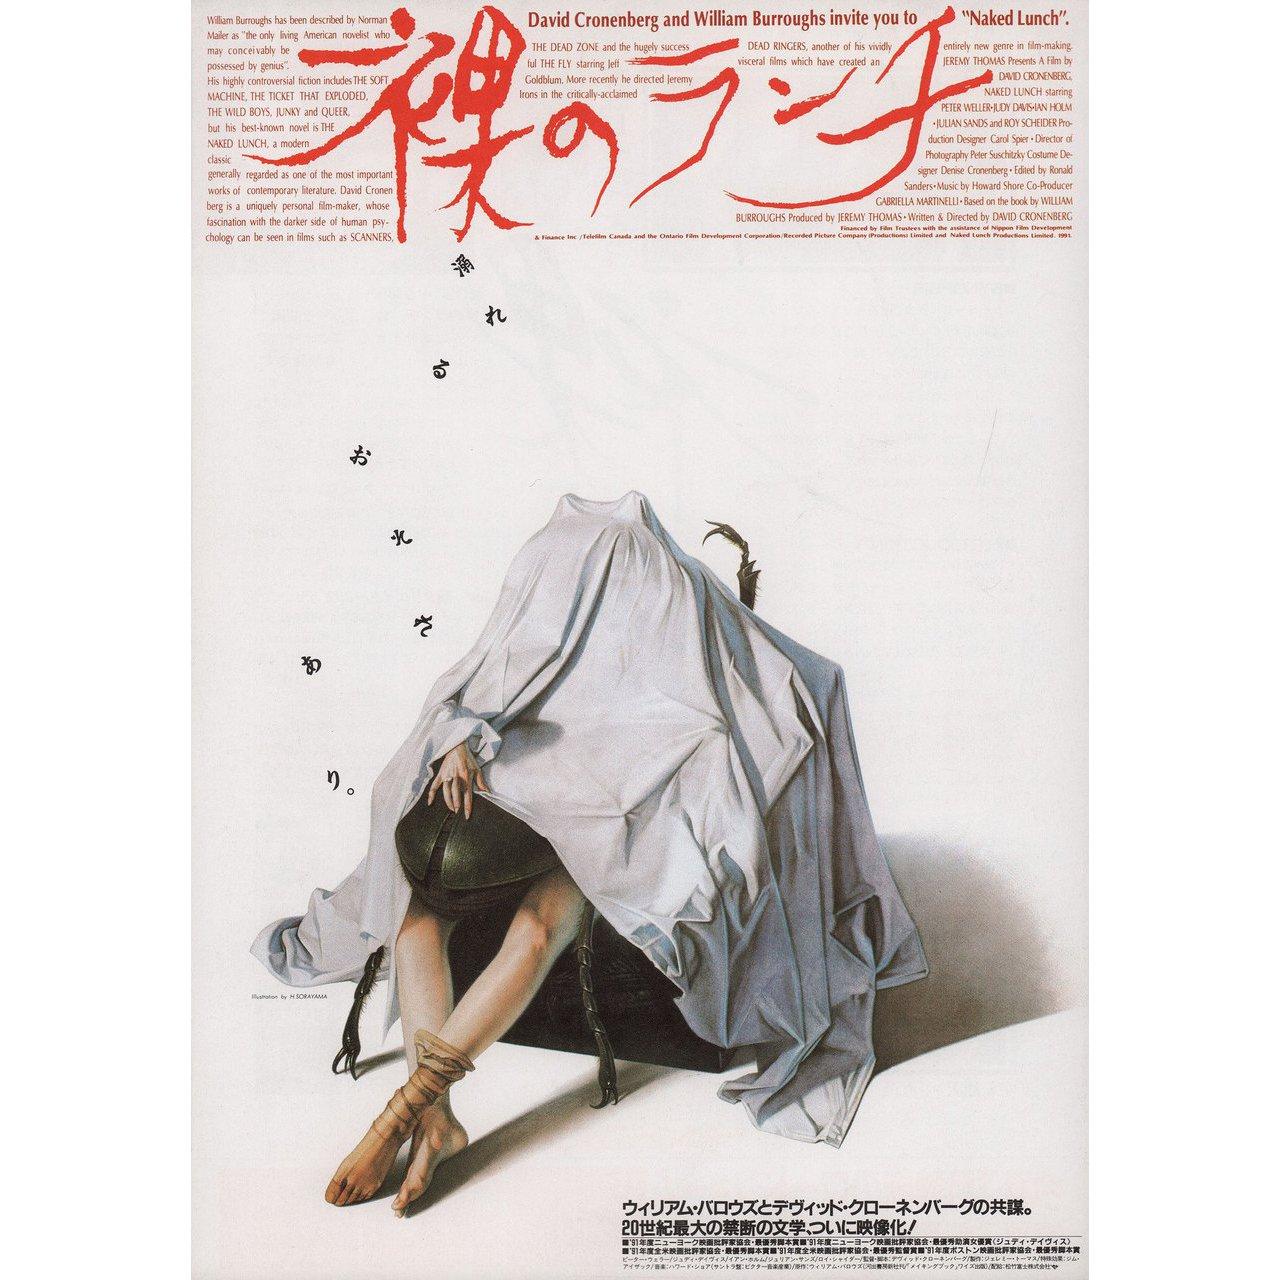 Original 1991 Japanese B5 chirashi flyer by Hajime Sorayama for the film Naked Lunch directed by David Cronenberg with Peter Weller / Judy Davis / Ian Holm / Julian Sands. Fine condition, rolled. Please note: the size is stated in inches and the